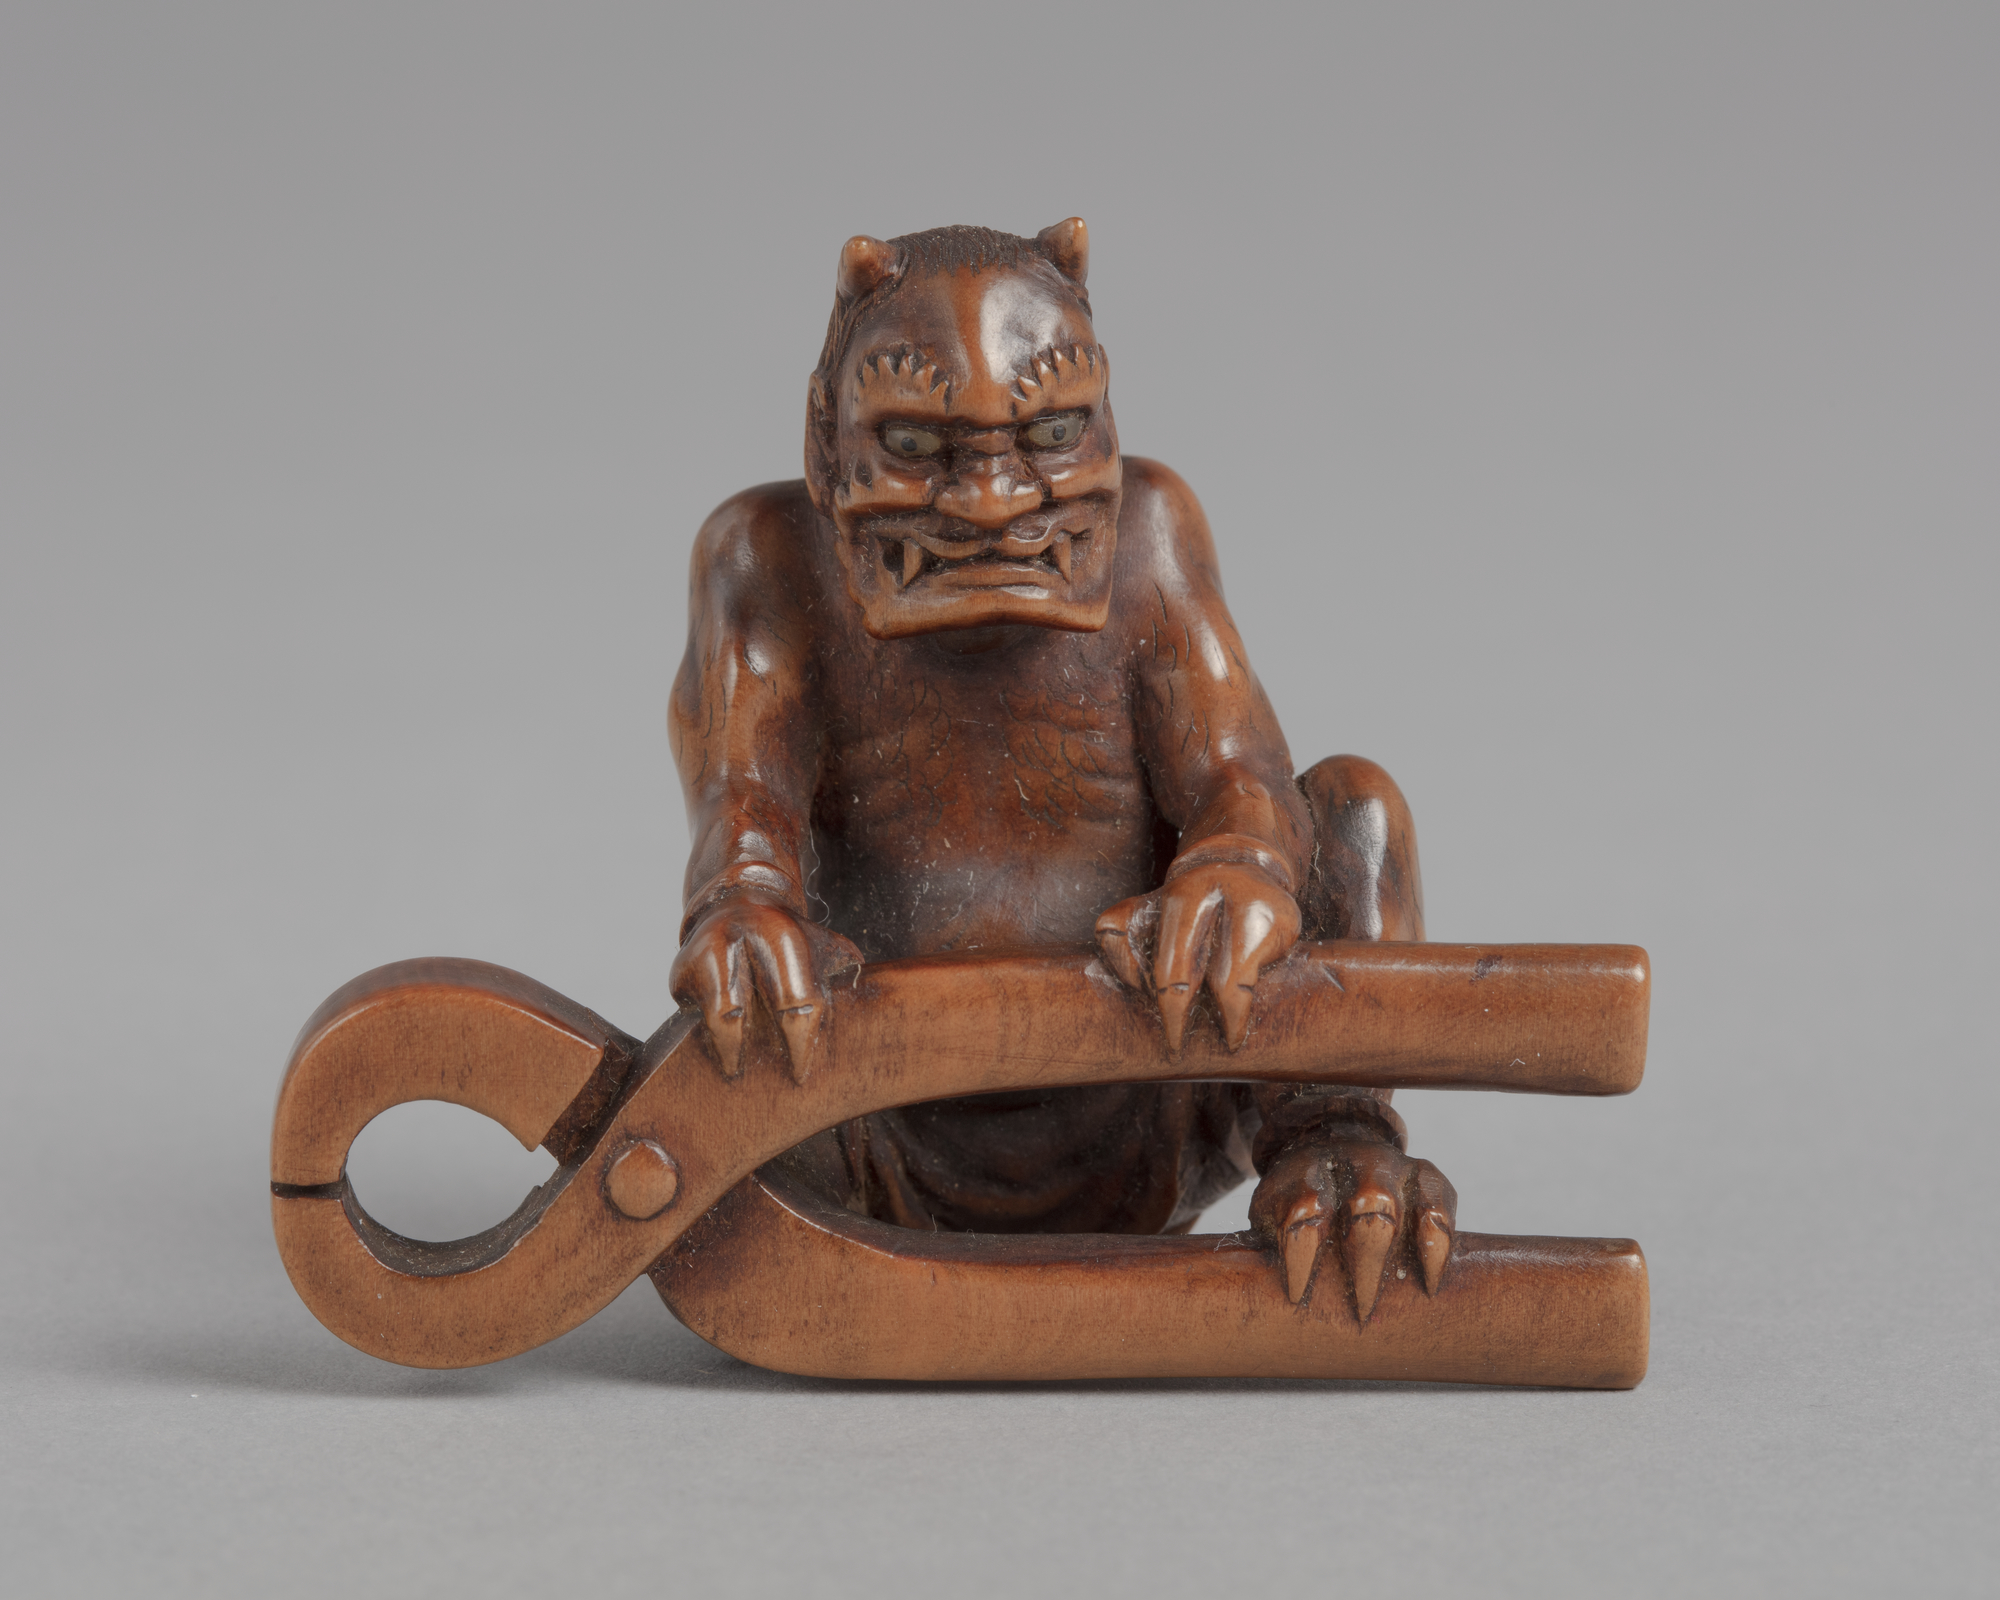 A Japanese ivory netsuke of a horned demon seated before a large pair of pliers with its hands resting on it.